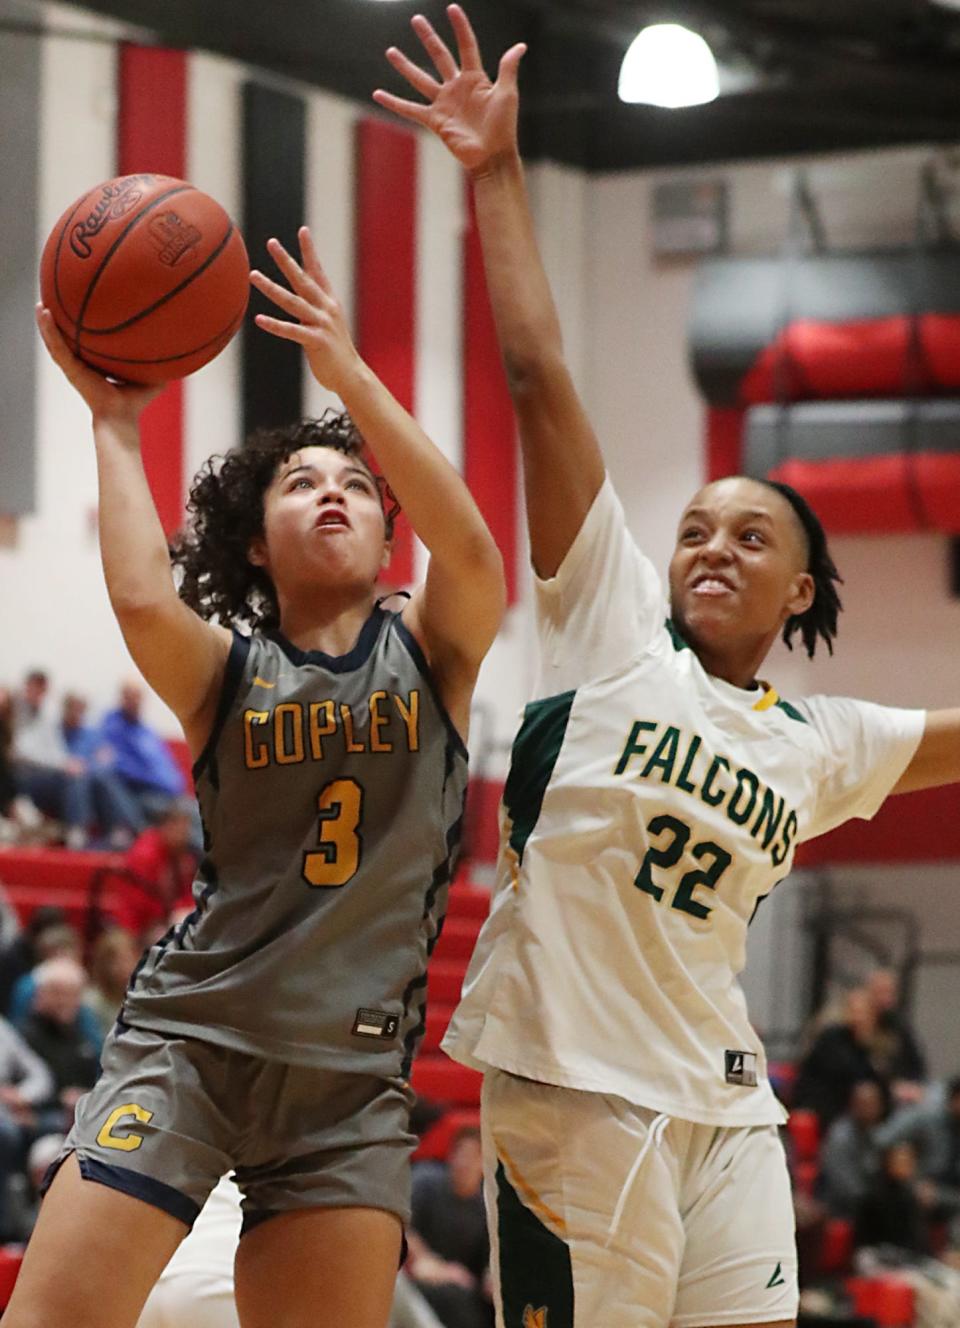 Copley's Izzy Callaway looks to shoot as Firestone's Aalivia Mullins defends during the Suburban vs. City Women's Tri-County Basket Ball Coaches Association 20204 Senior All-Star Game on Monday in Norton.